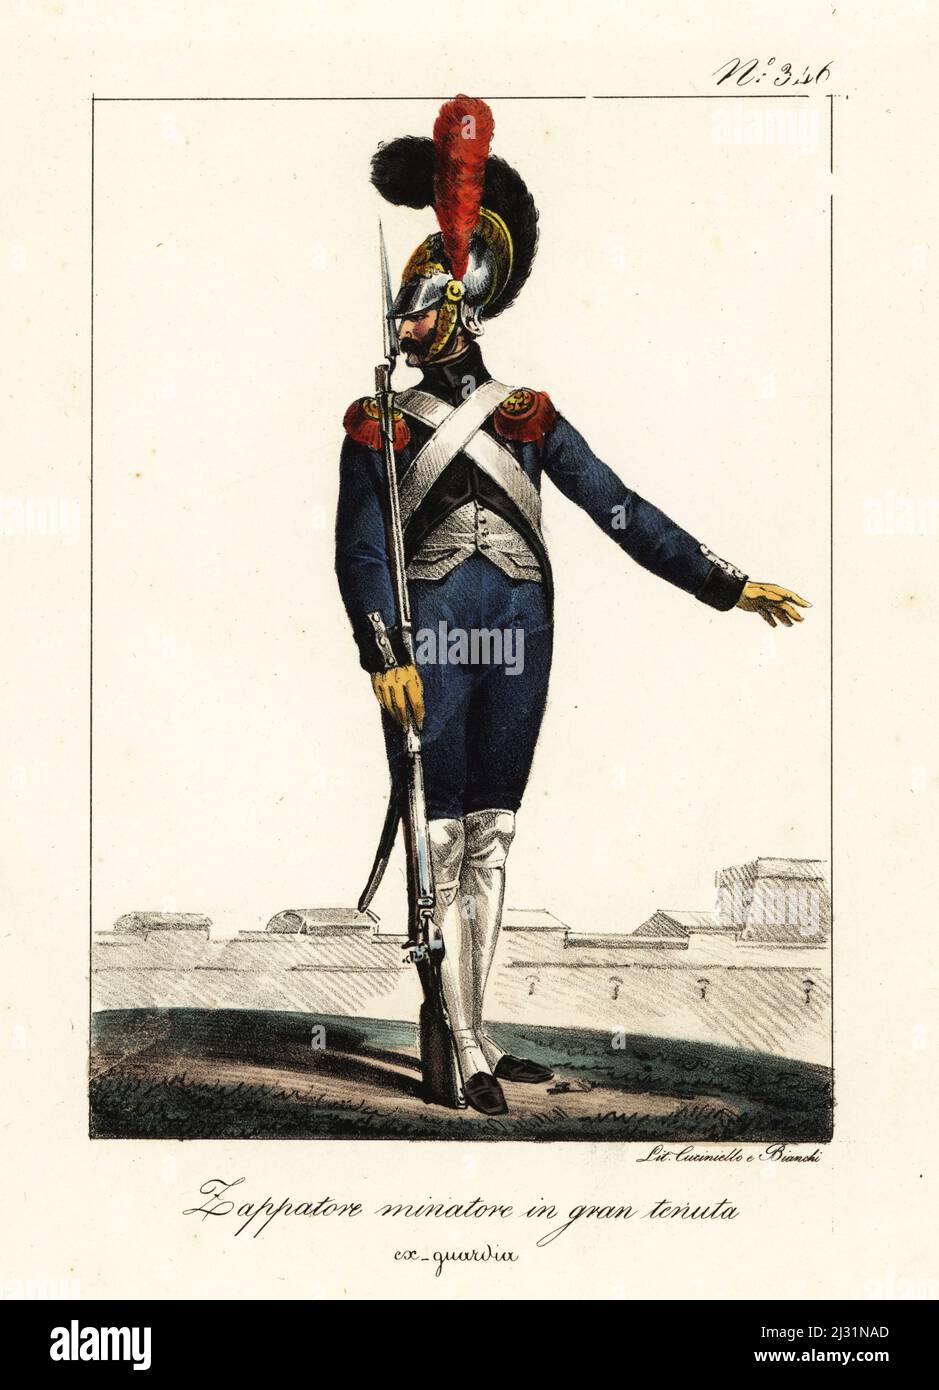 Sapper in full-dress uniform, Napoleon's Army. In dragoon's helmet with plume, blue coat, red and gold epaulettes, breeches, gaiters, musket with bayonet. Sapeur mineur, en Grande tenue, ex-garde. Handcoloured lithograph by Lorenzo Bianchi and Domenico Cuciniello after Hippolyte Lecomte from Costumi civili e militari della monarchia francese dal 1200 al 1820, Naples, 1825. Italian edition of Lecomte’s Civilian and military costumes of the French monarchy from 1200 to 1820. Stock Photo